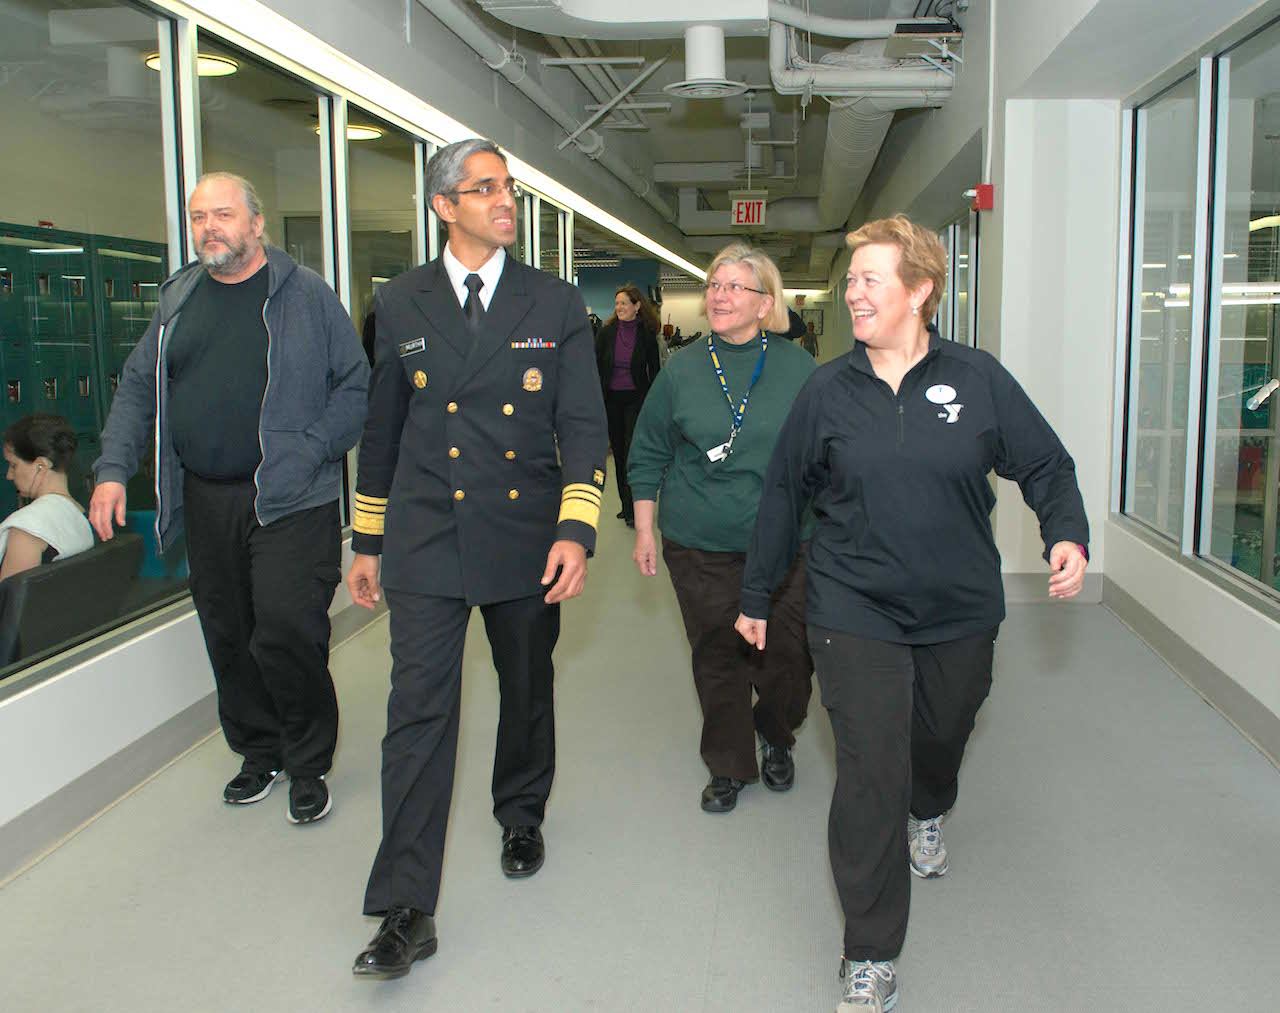 Better health is a walk in the park — or the gym: During his recent visit to the McBurney YMCA on W. 14th St., Surgeon General Vivek Murthy took a brisk walk on the jogging track with, from left, Paul Groncki, Rita Fischer and Ruth Gursky, as they discussed the benefits of walking.  Photo by Raymond Liang 